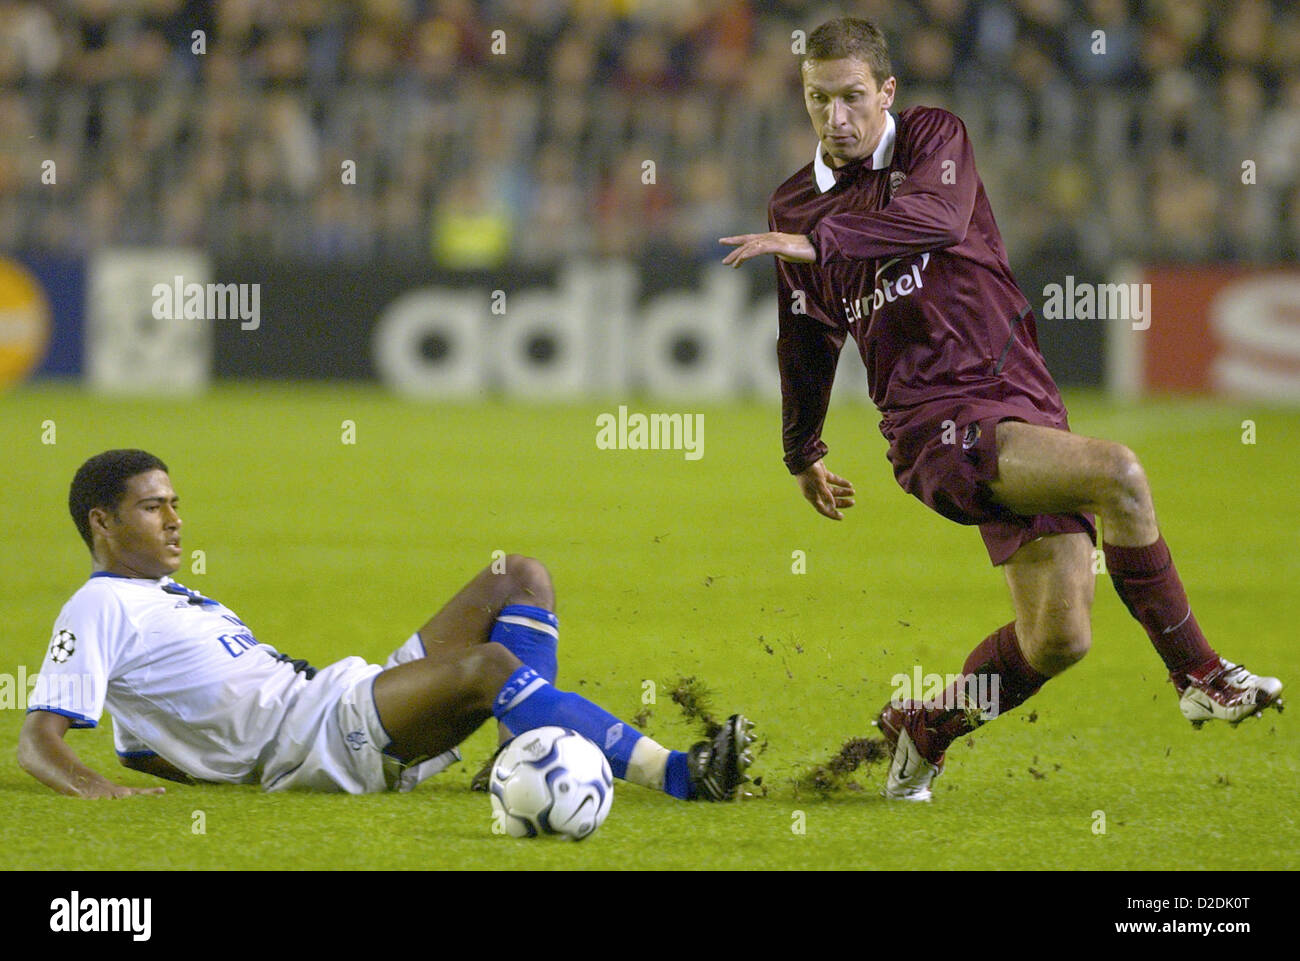 ***FILE PHOTO***FC Chelsea's player Glen Johnson, left, fights for the ball with Martin Zboncak of Sparta Prague, right, during the Champions League group G soccer match played in Prague on Tuesday, Sept. 16, 2003.  Sparta will play against Chelsea in the 2nd round of Europa League in Prague on February 14, 2013.  (CTK Photo/Michal Kamaryt) Stock Photo